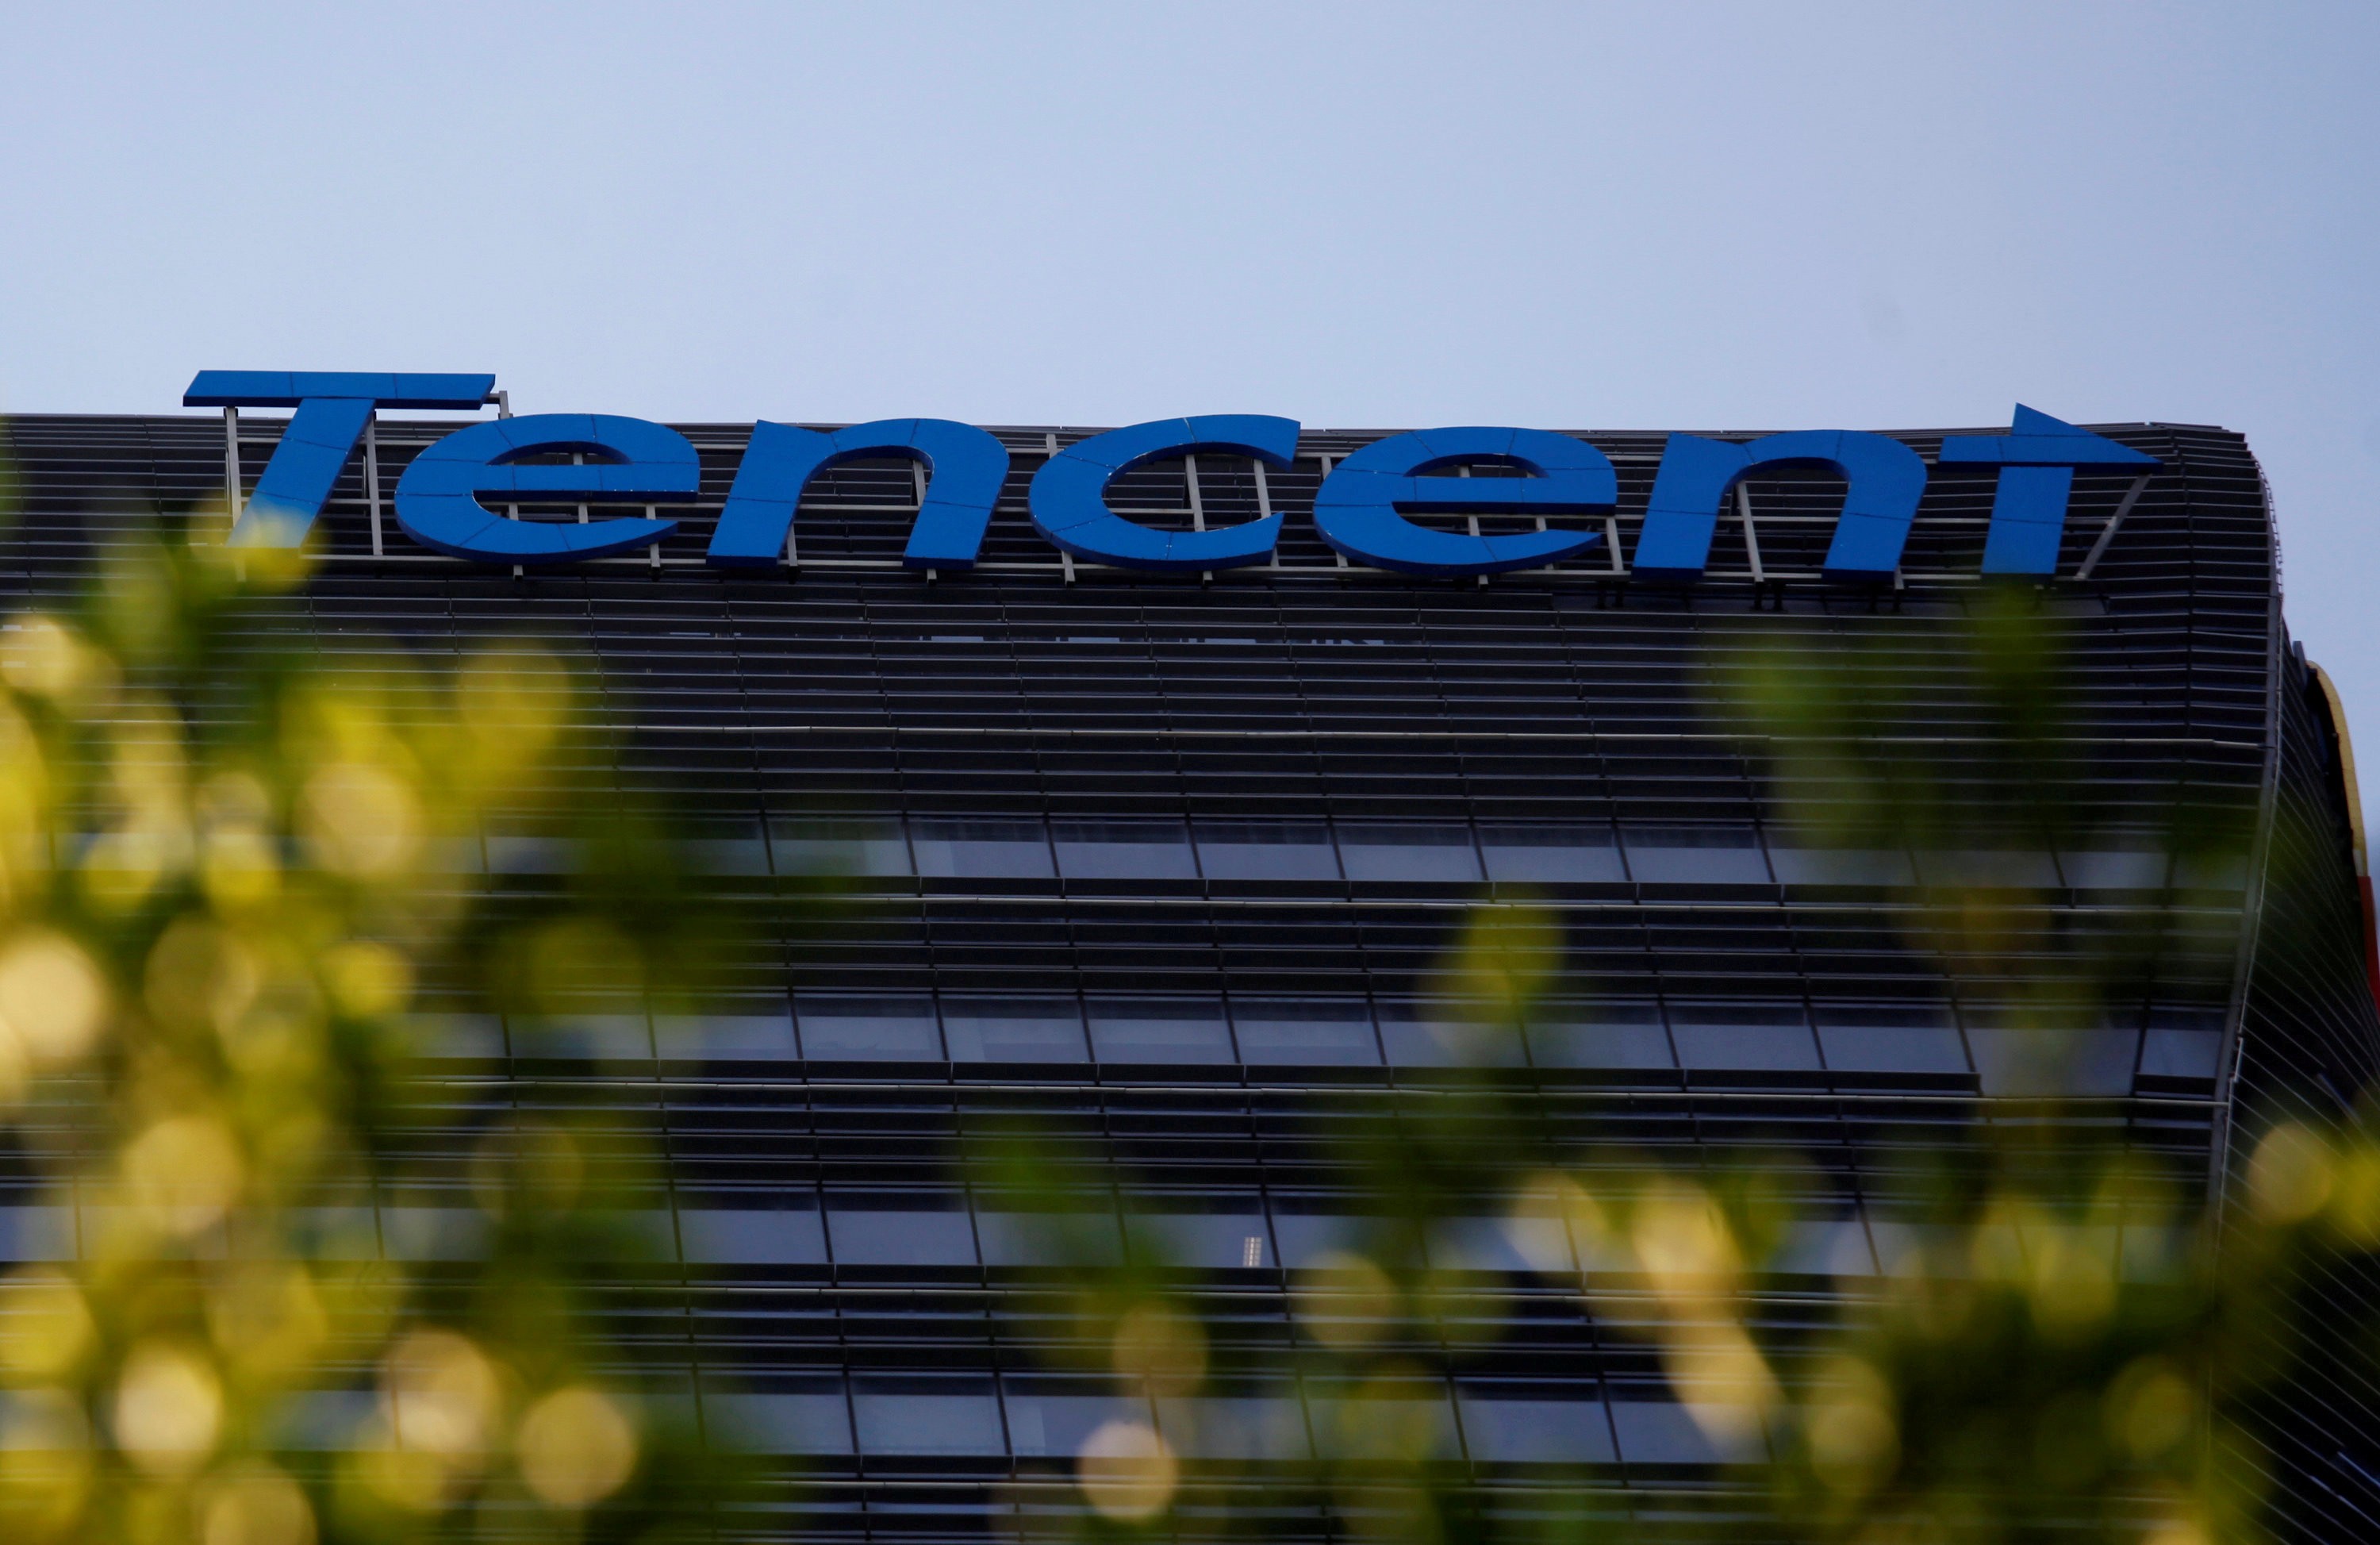 Tencent’s valuation is elevated after a more than 100 per cent rally last year. Photo: Reuters